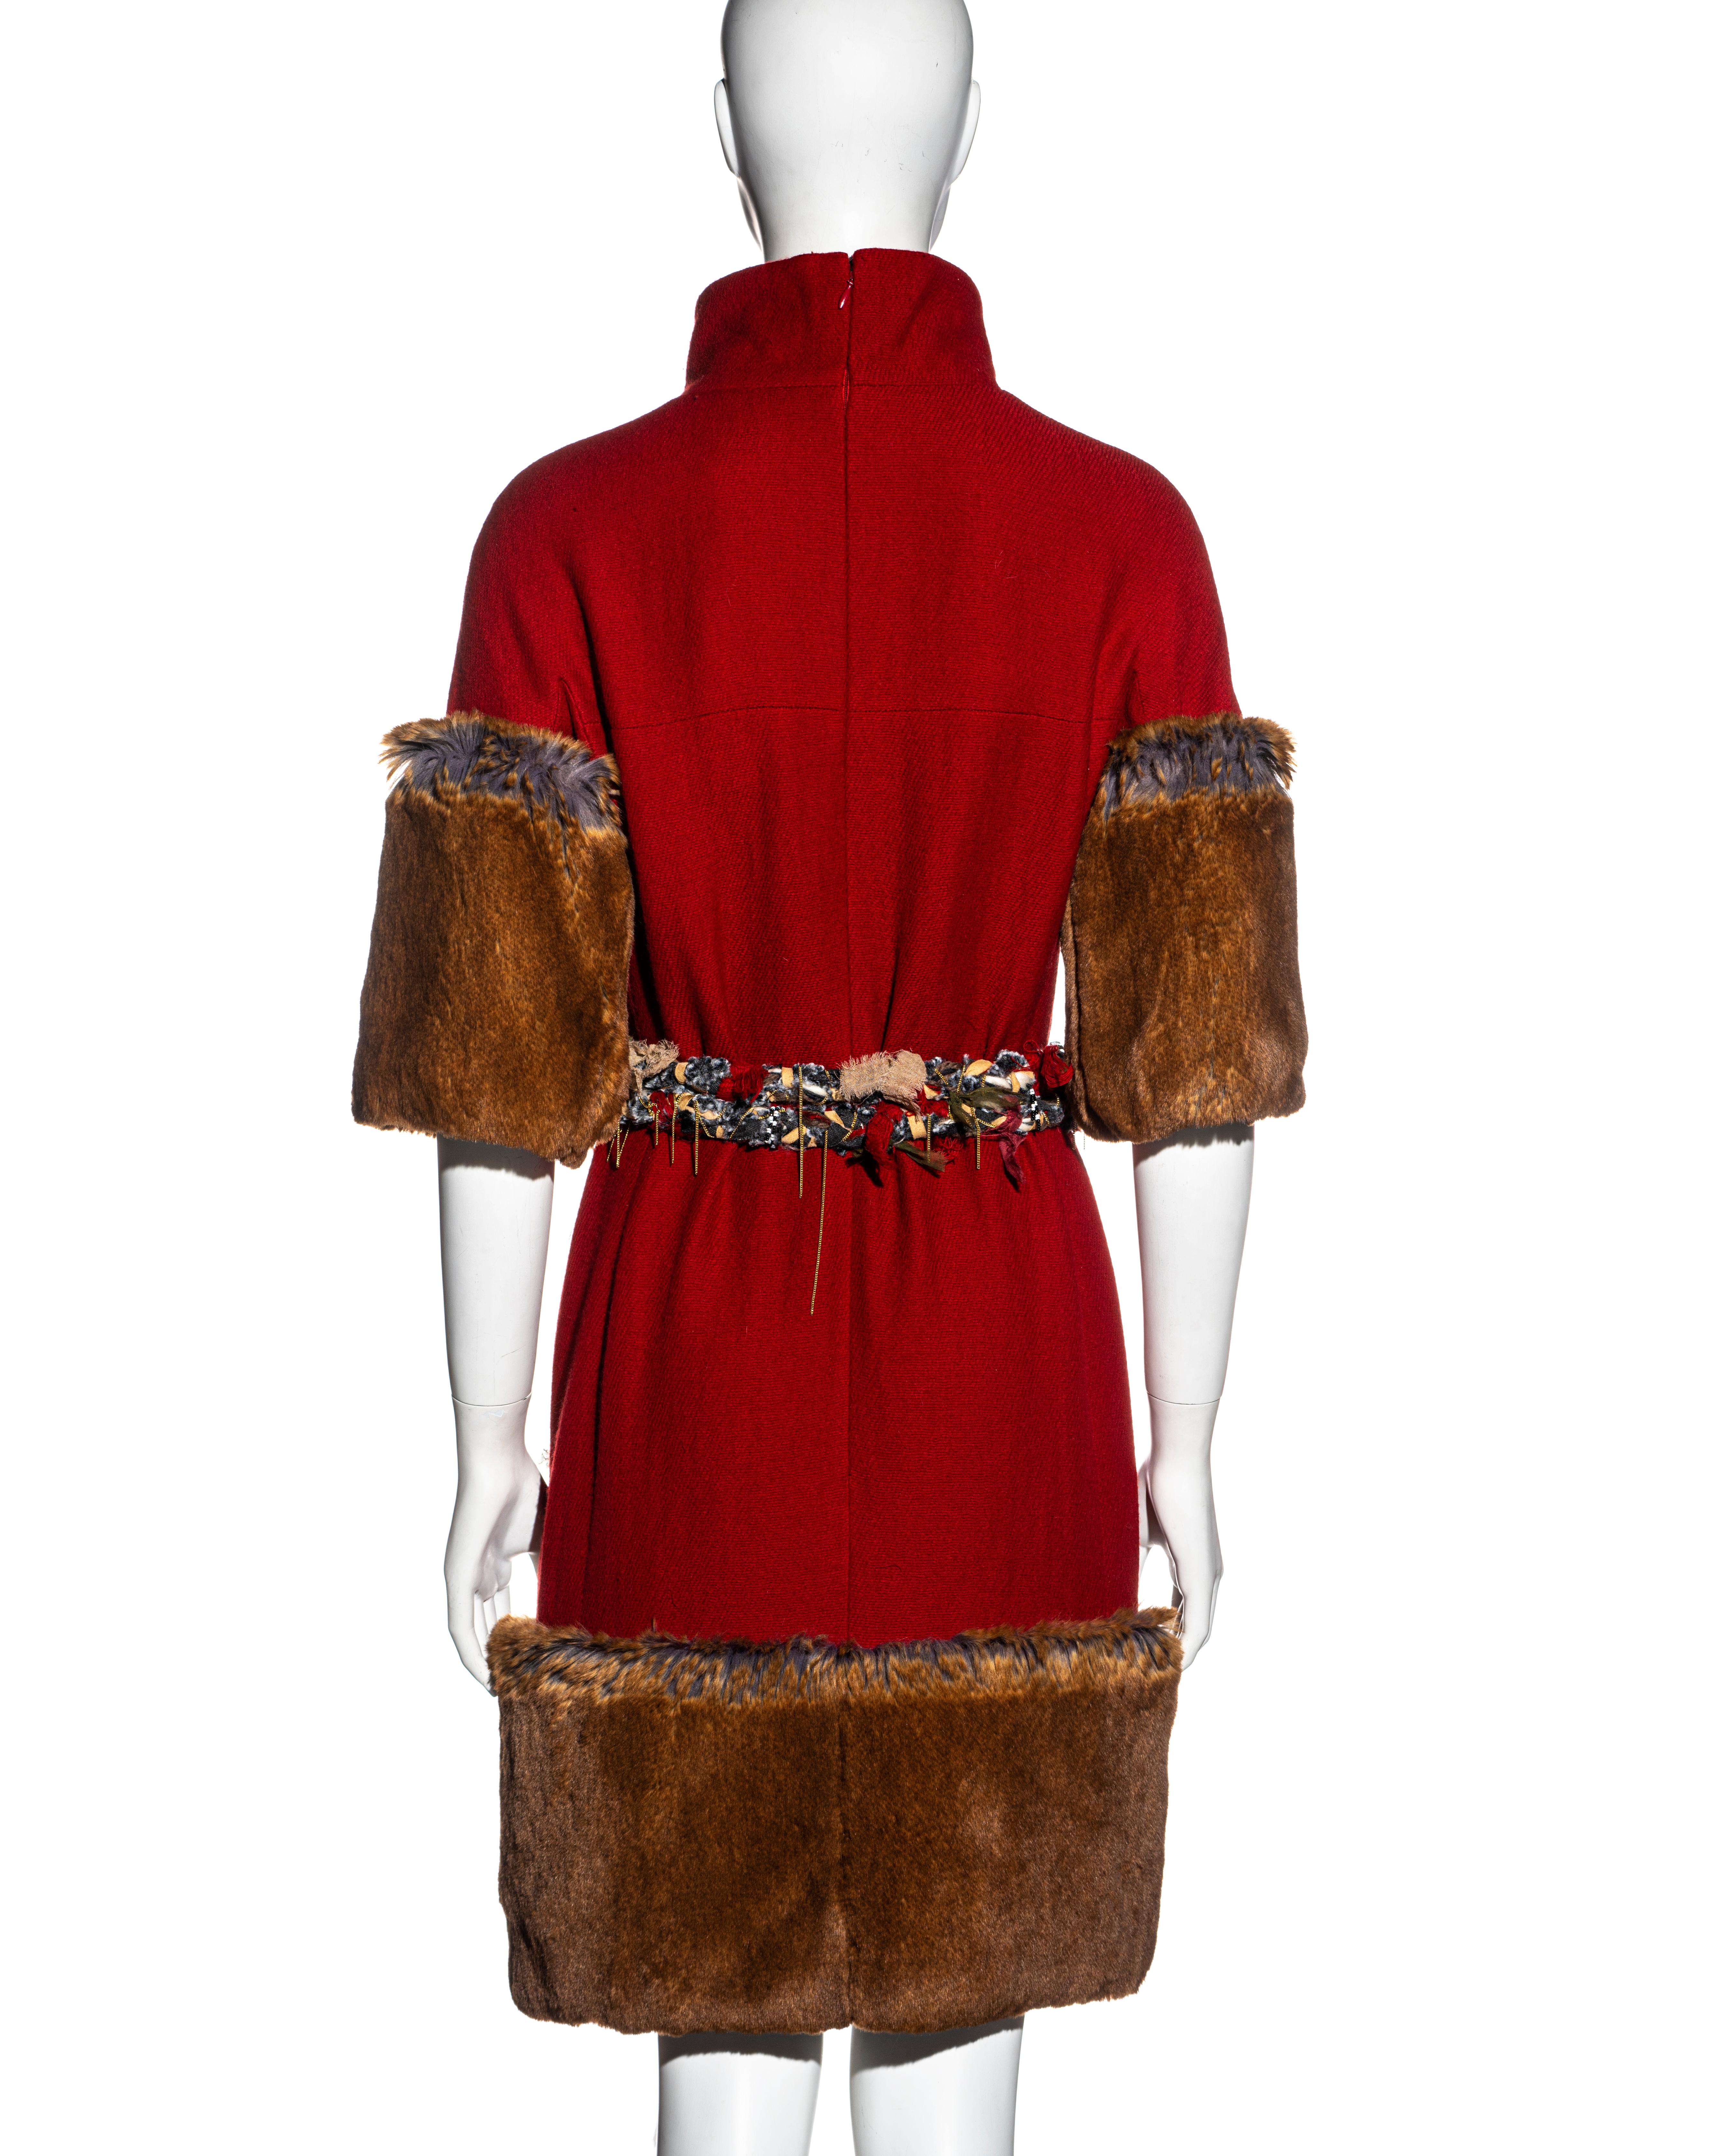 Chanel by Karl Lagerfeld red cashmere wool and faux fur dress, fw 2010 For Sale 3